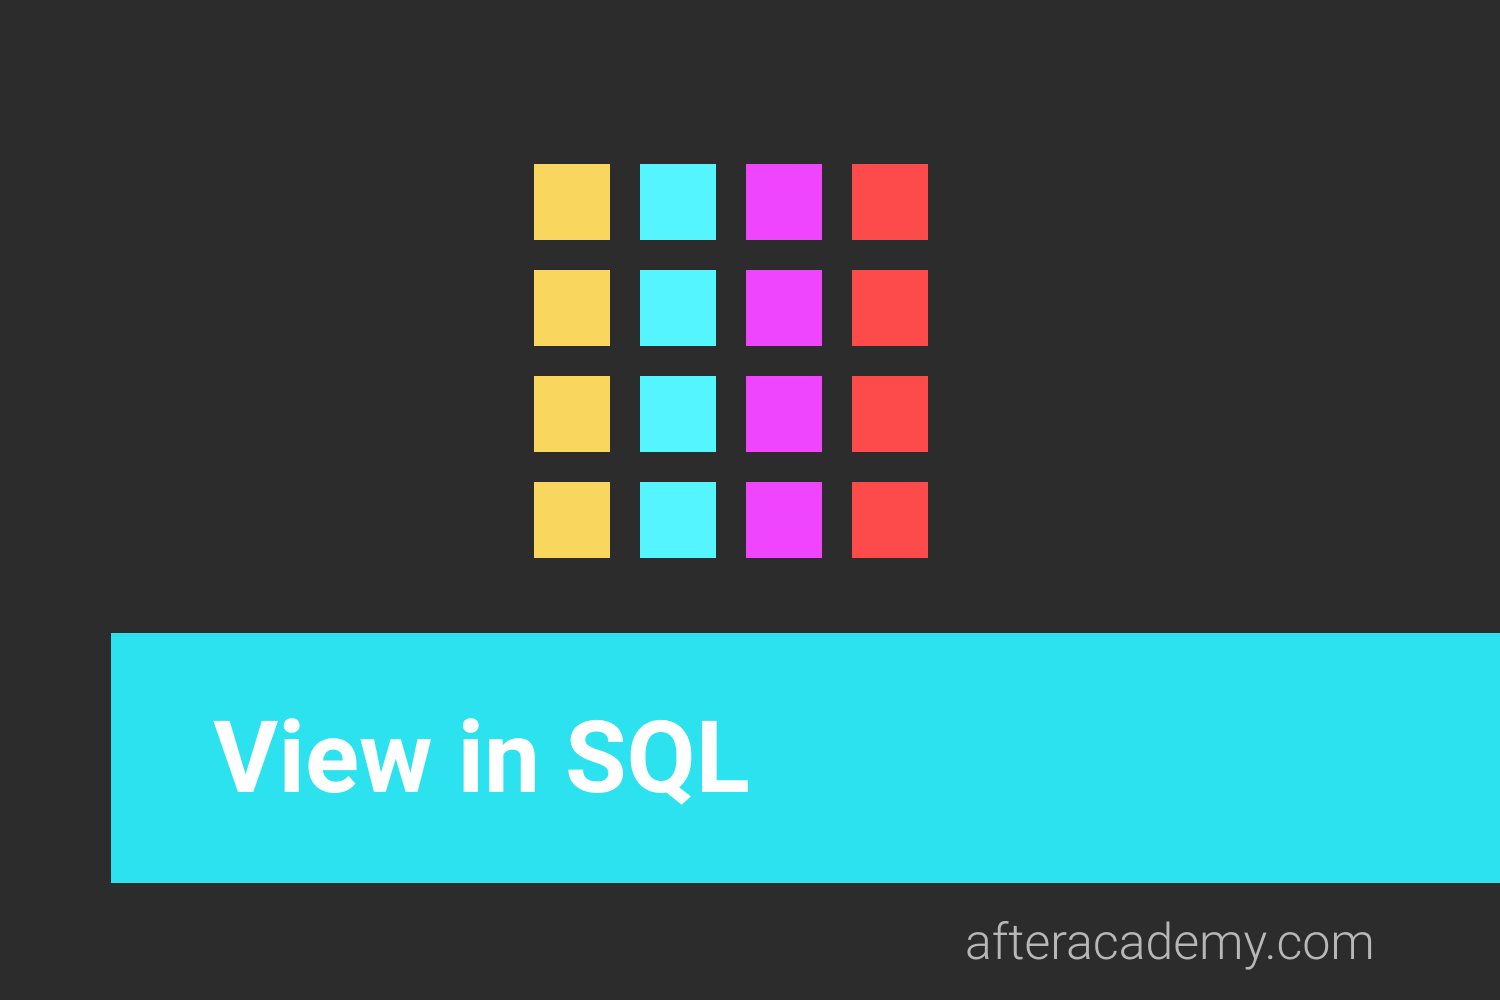 What is View in SQL?